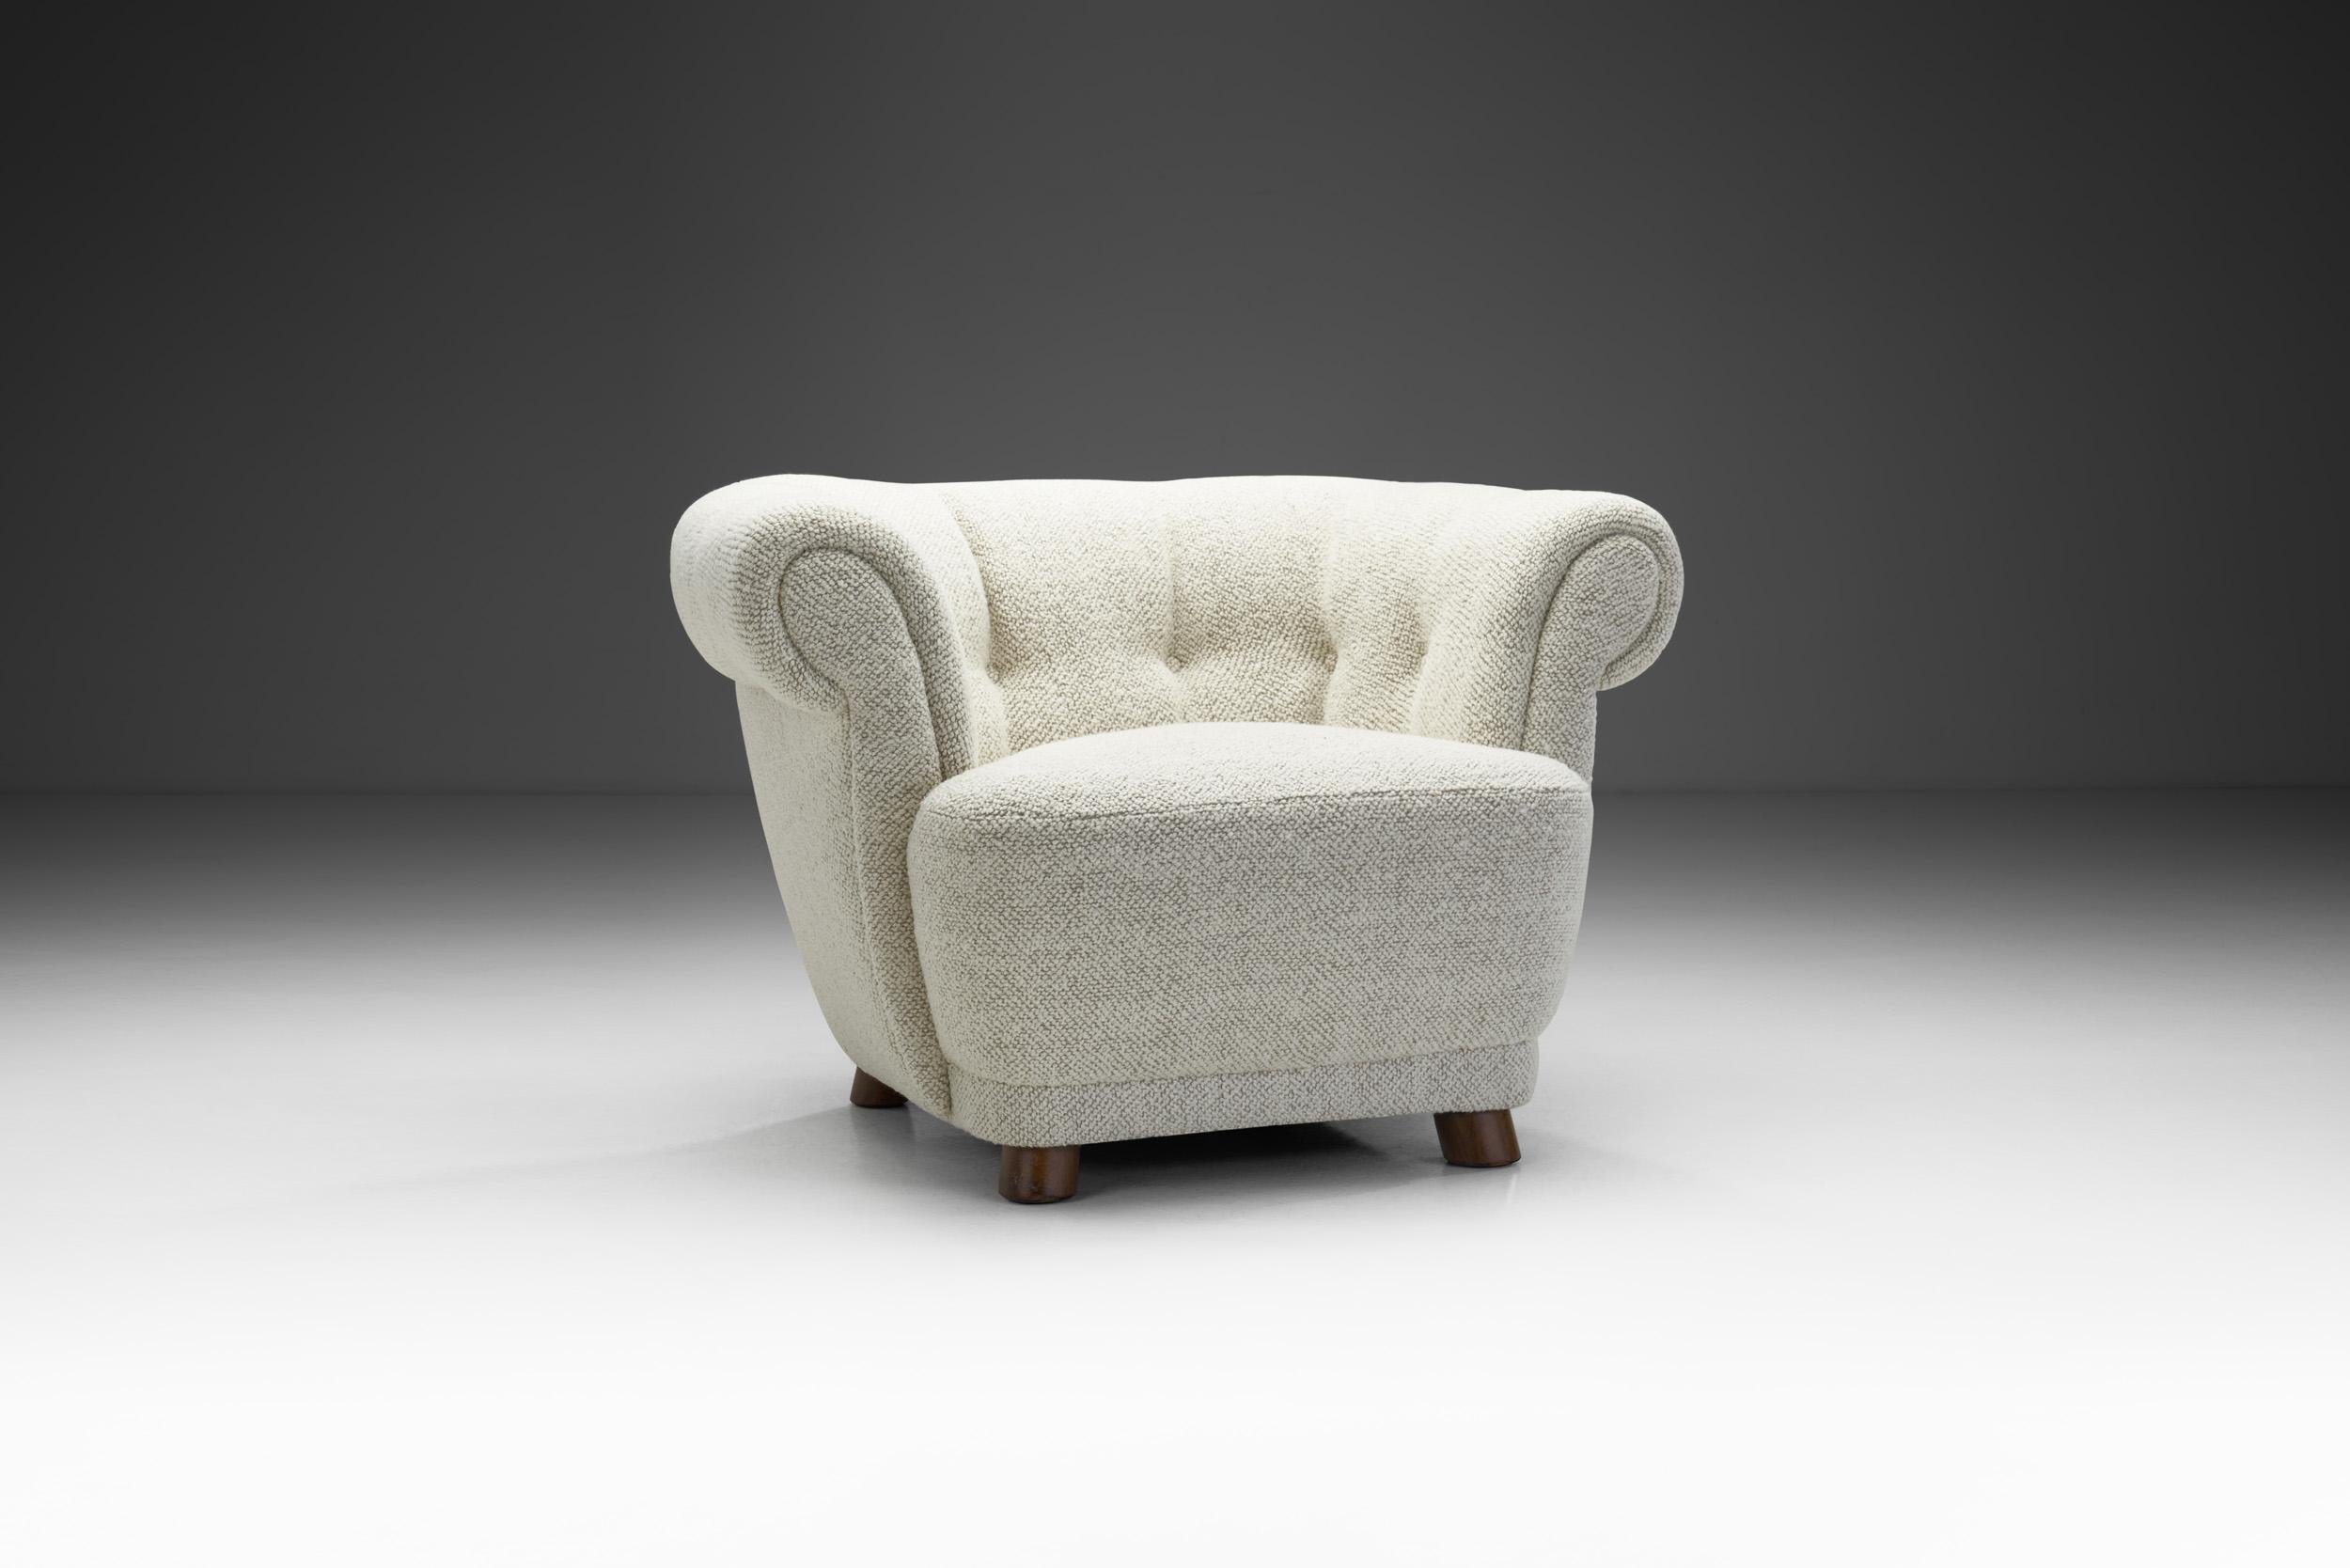 This beautiful easy chair is the Danish interpretation of the classic British upholstered seating style, the Chesterfield. Considering its structural, material and visual qualities, this easy chair is the perfect illustration of why Danish